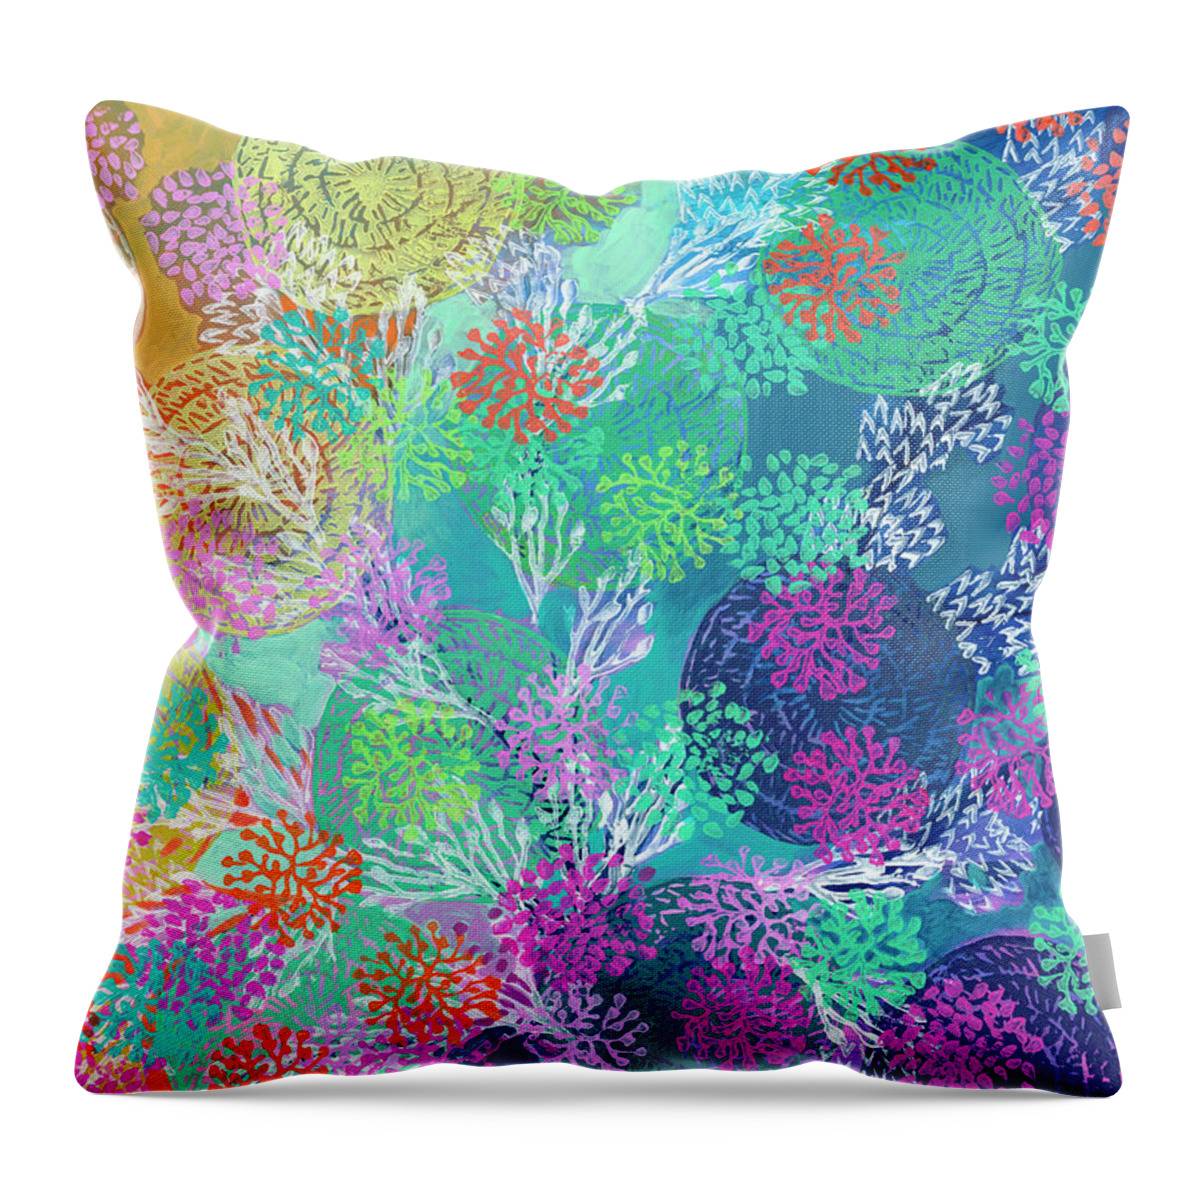 Rainbow Throw Pillow featuring the painting Dreaming of Rainbows by Jennifer Lommers